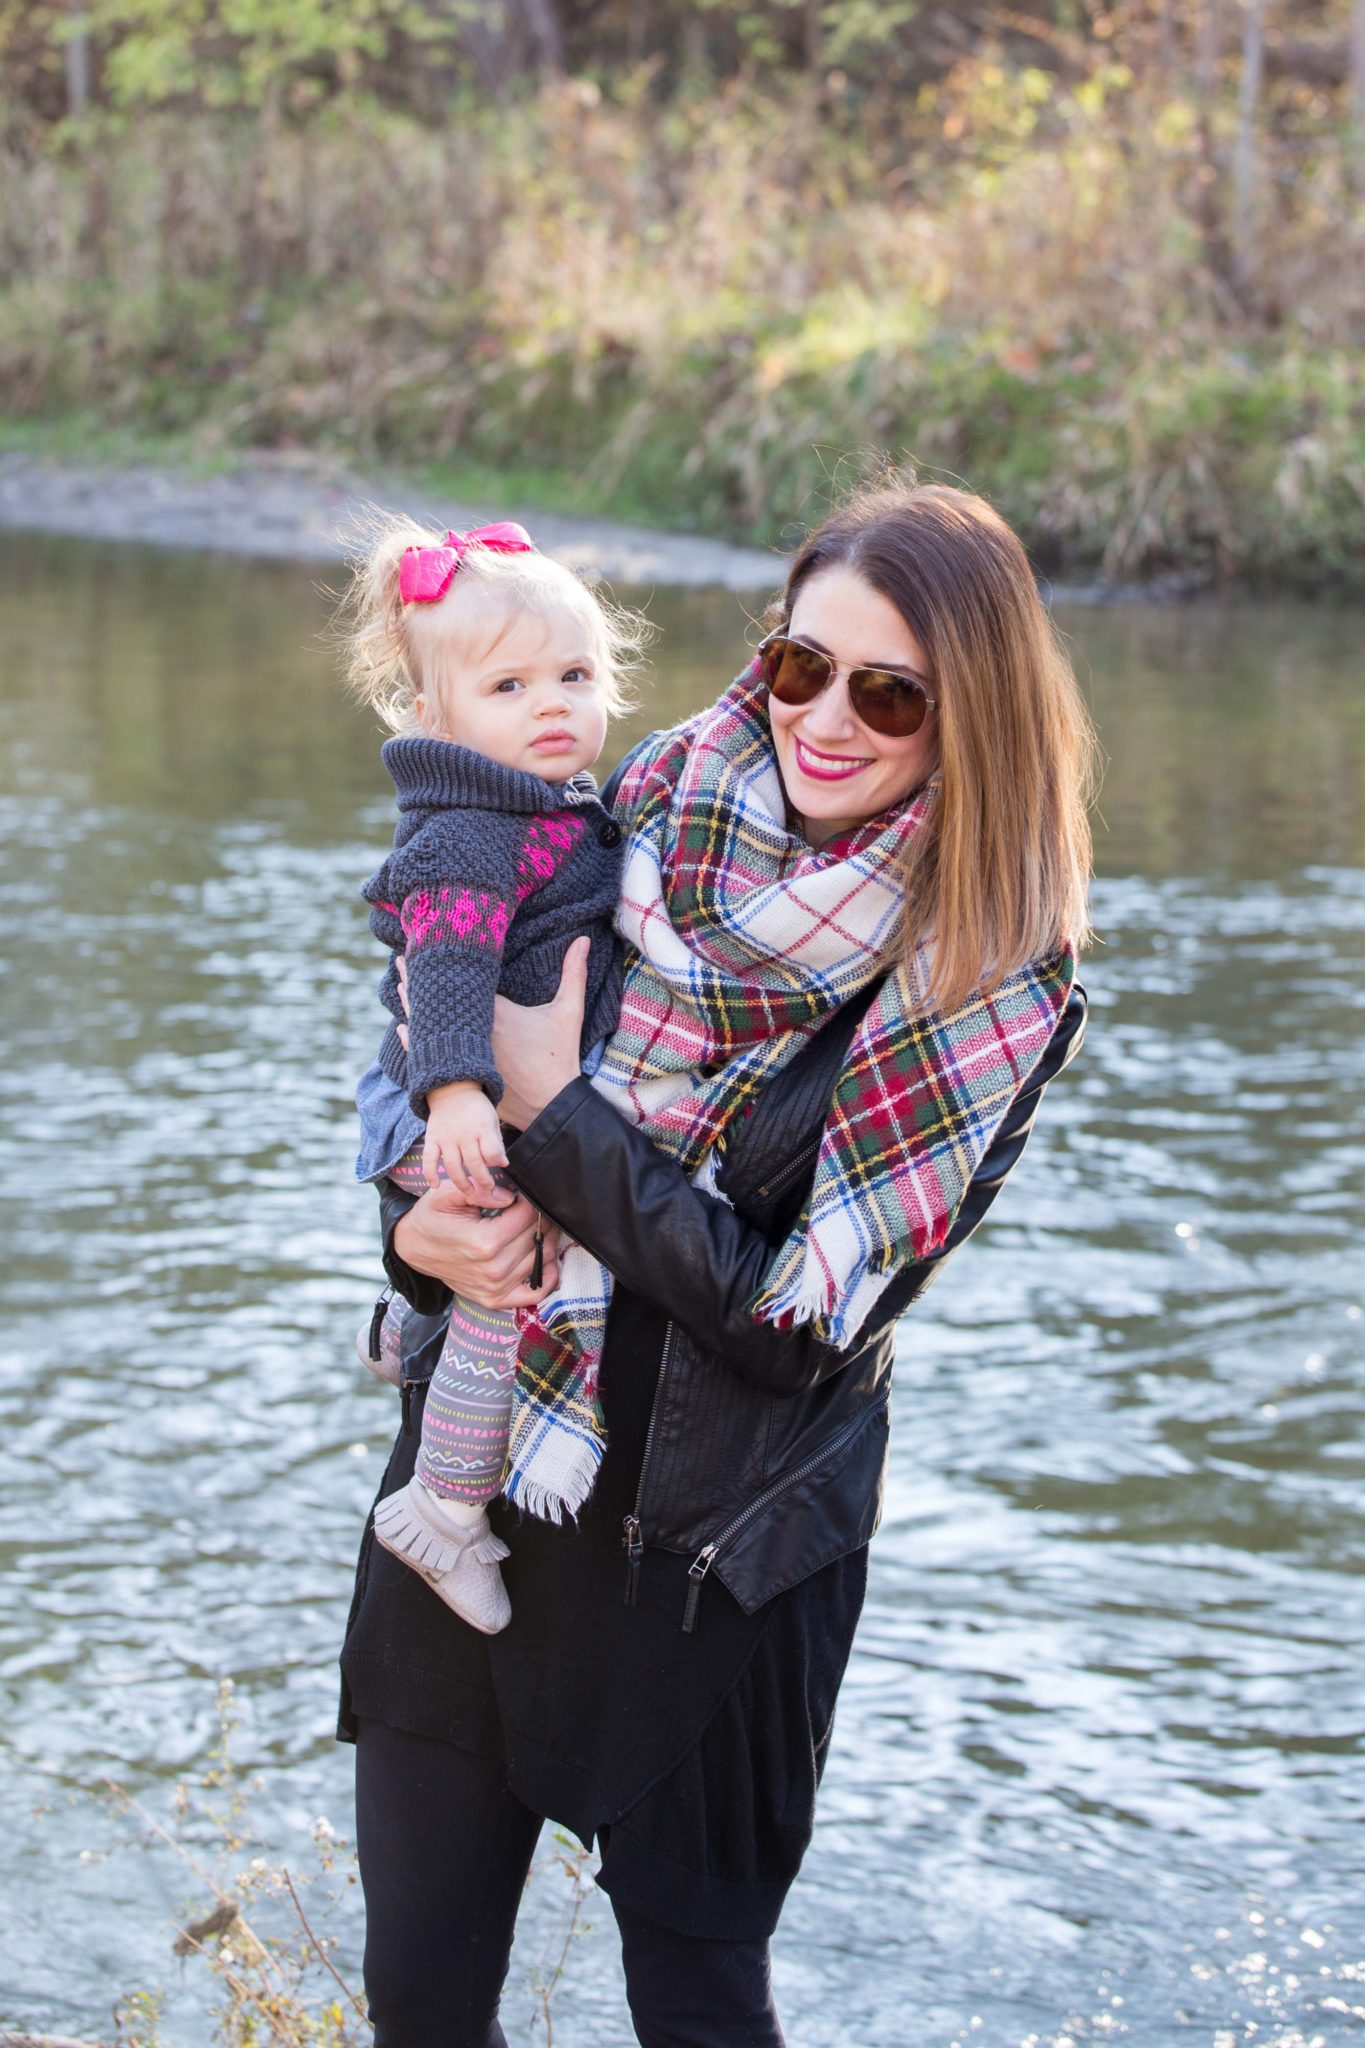 fall style | mom and me style | toddler style | outdoor photography | family photography | blanket scarf style | allweareblog.com